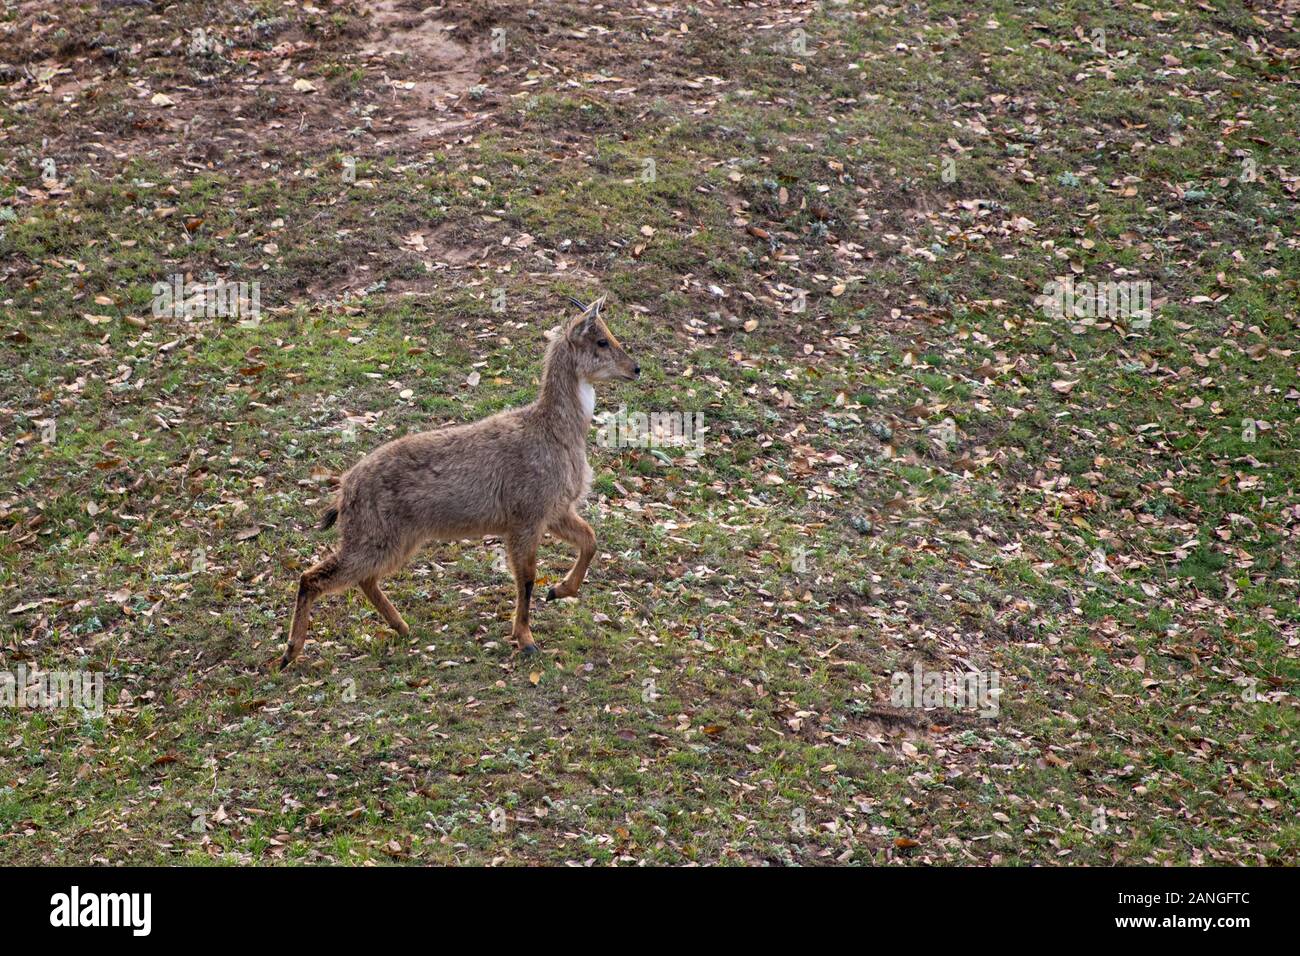 The Himalayan goral, Naemorhedus goral. Listed as Near Threatened on the IUCN Red List , Chopta, Garhwal, Uttarakhand, india Stock Photo